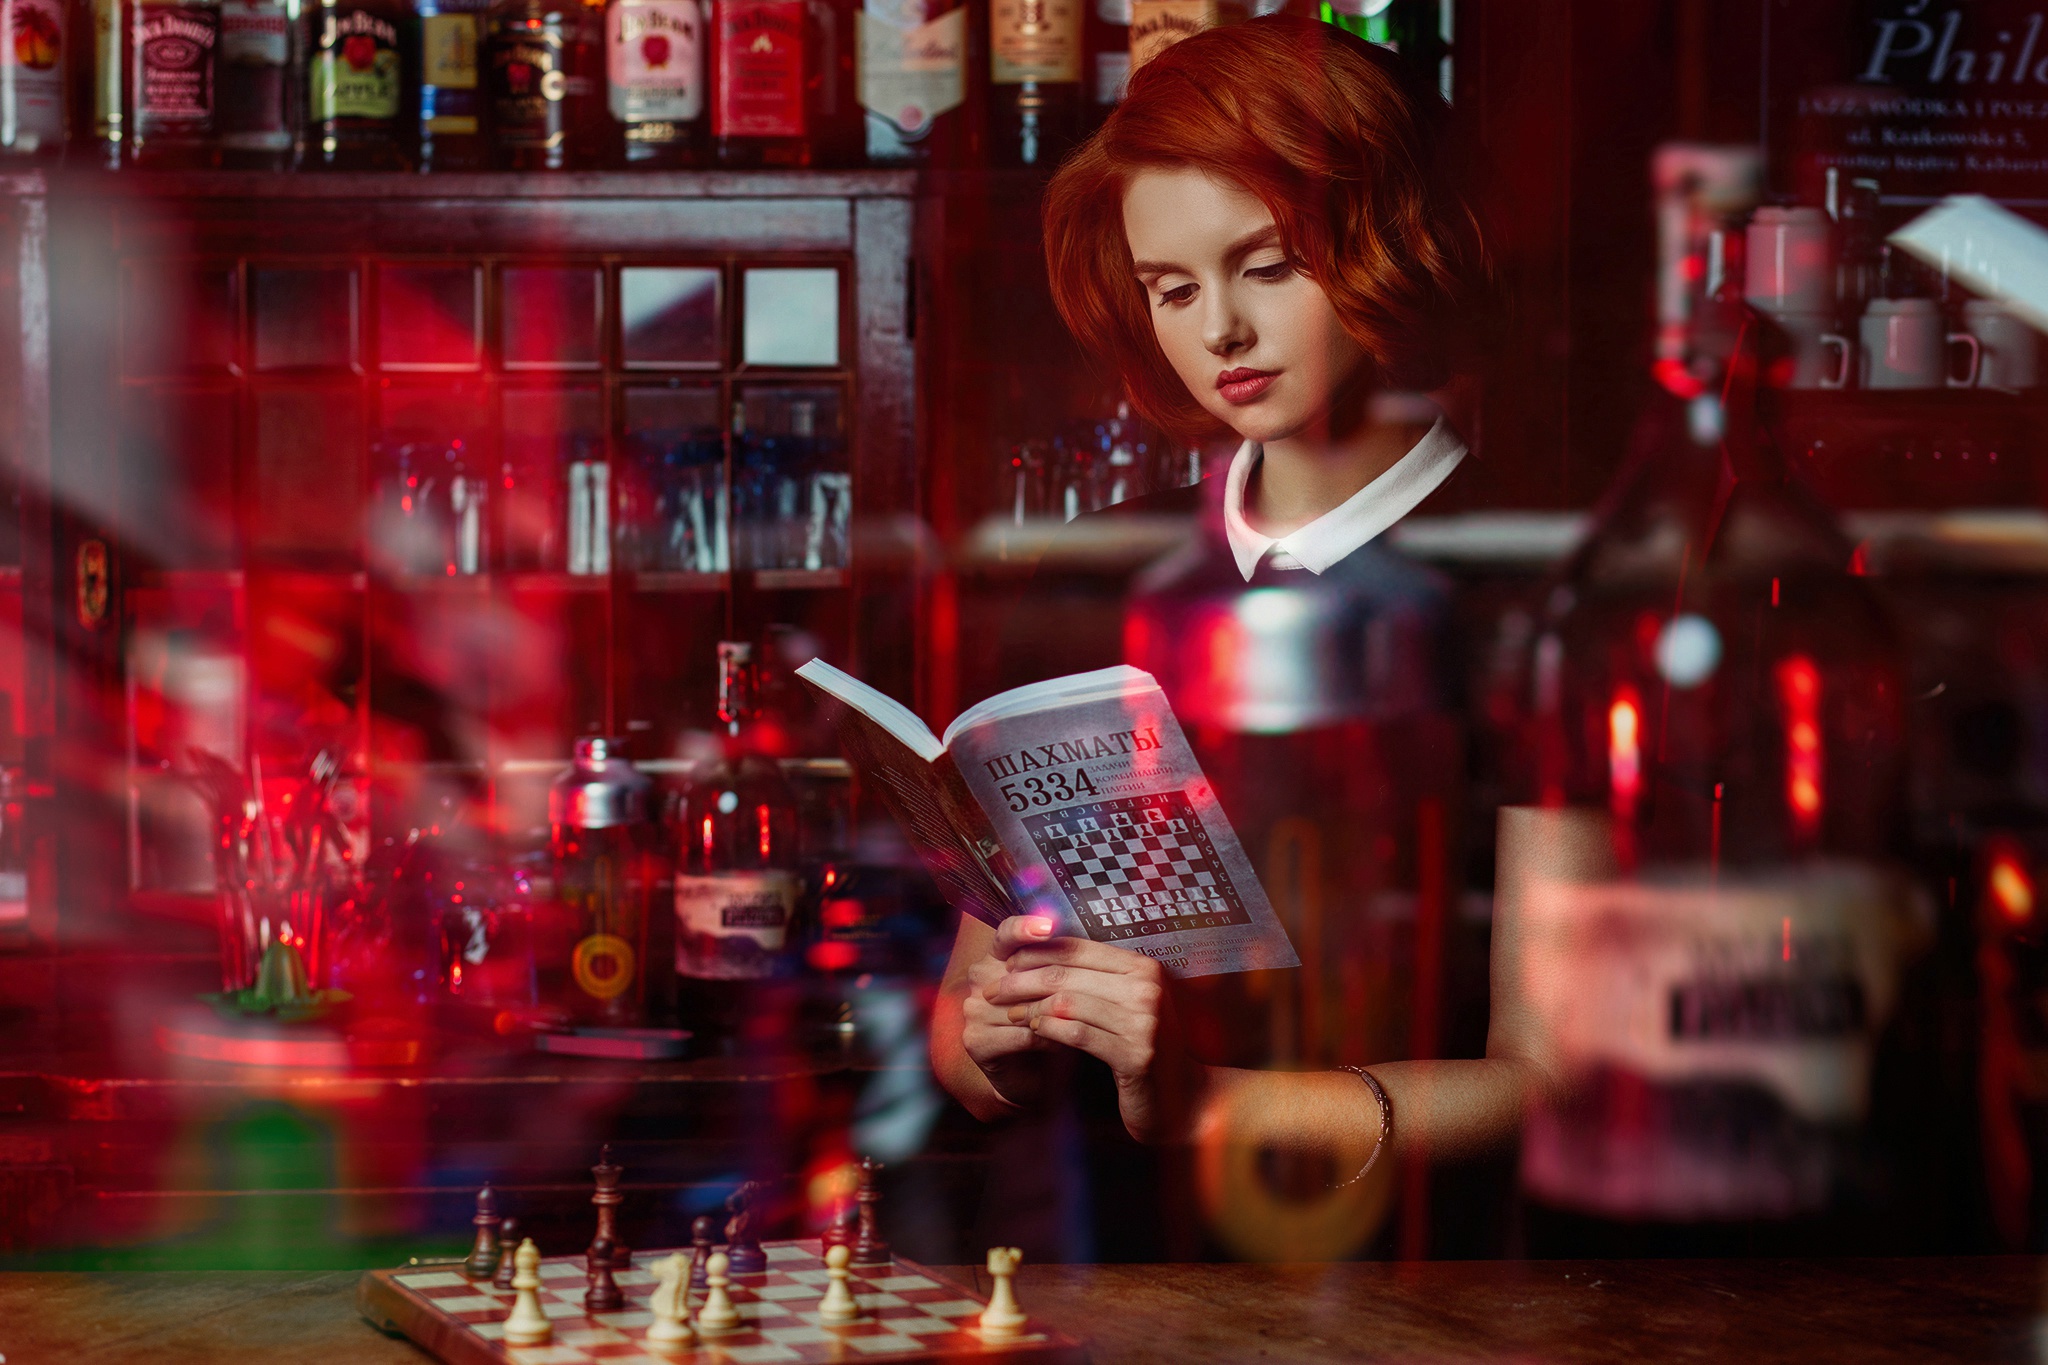 Women Indoors Chess Women Indoors Reading Books Dyed Hair Redhead Board Games Makeup Numbers Red Lip 2048x1365